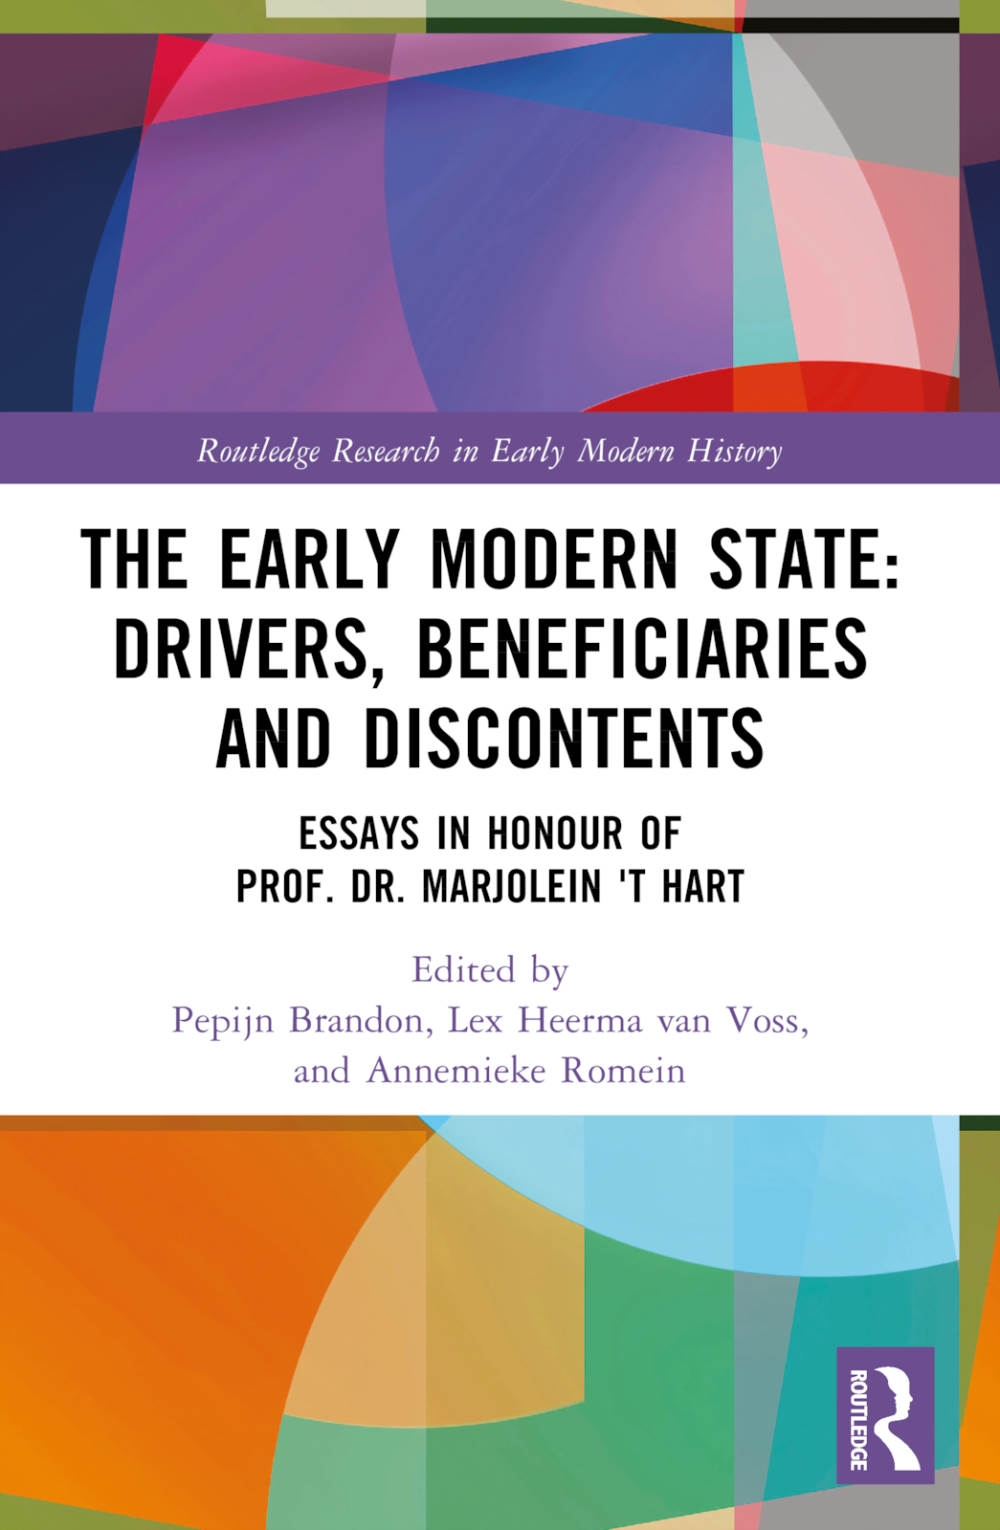 The Early Modern State: Drivers, Beneficiaries and Discontents: Essays in Honour of Prof. Dr. Marjolein ’t Hart